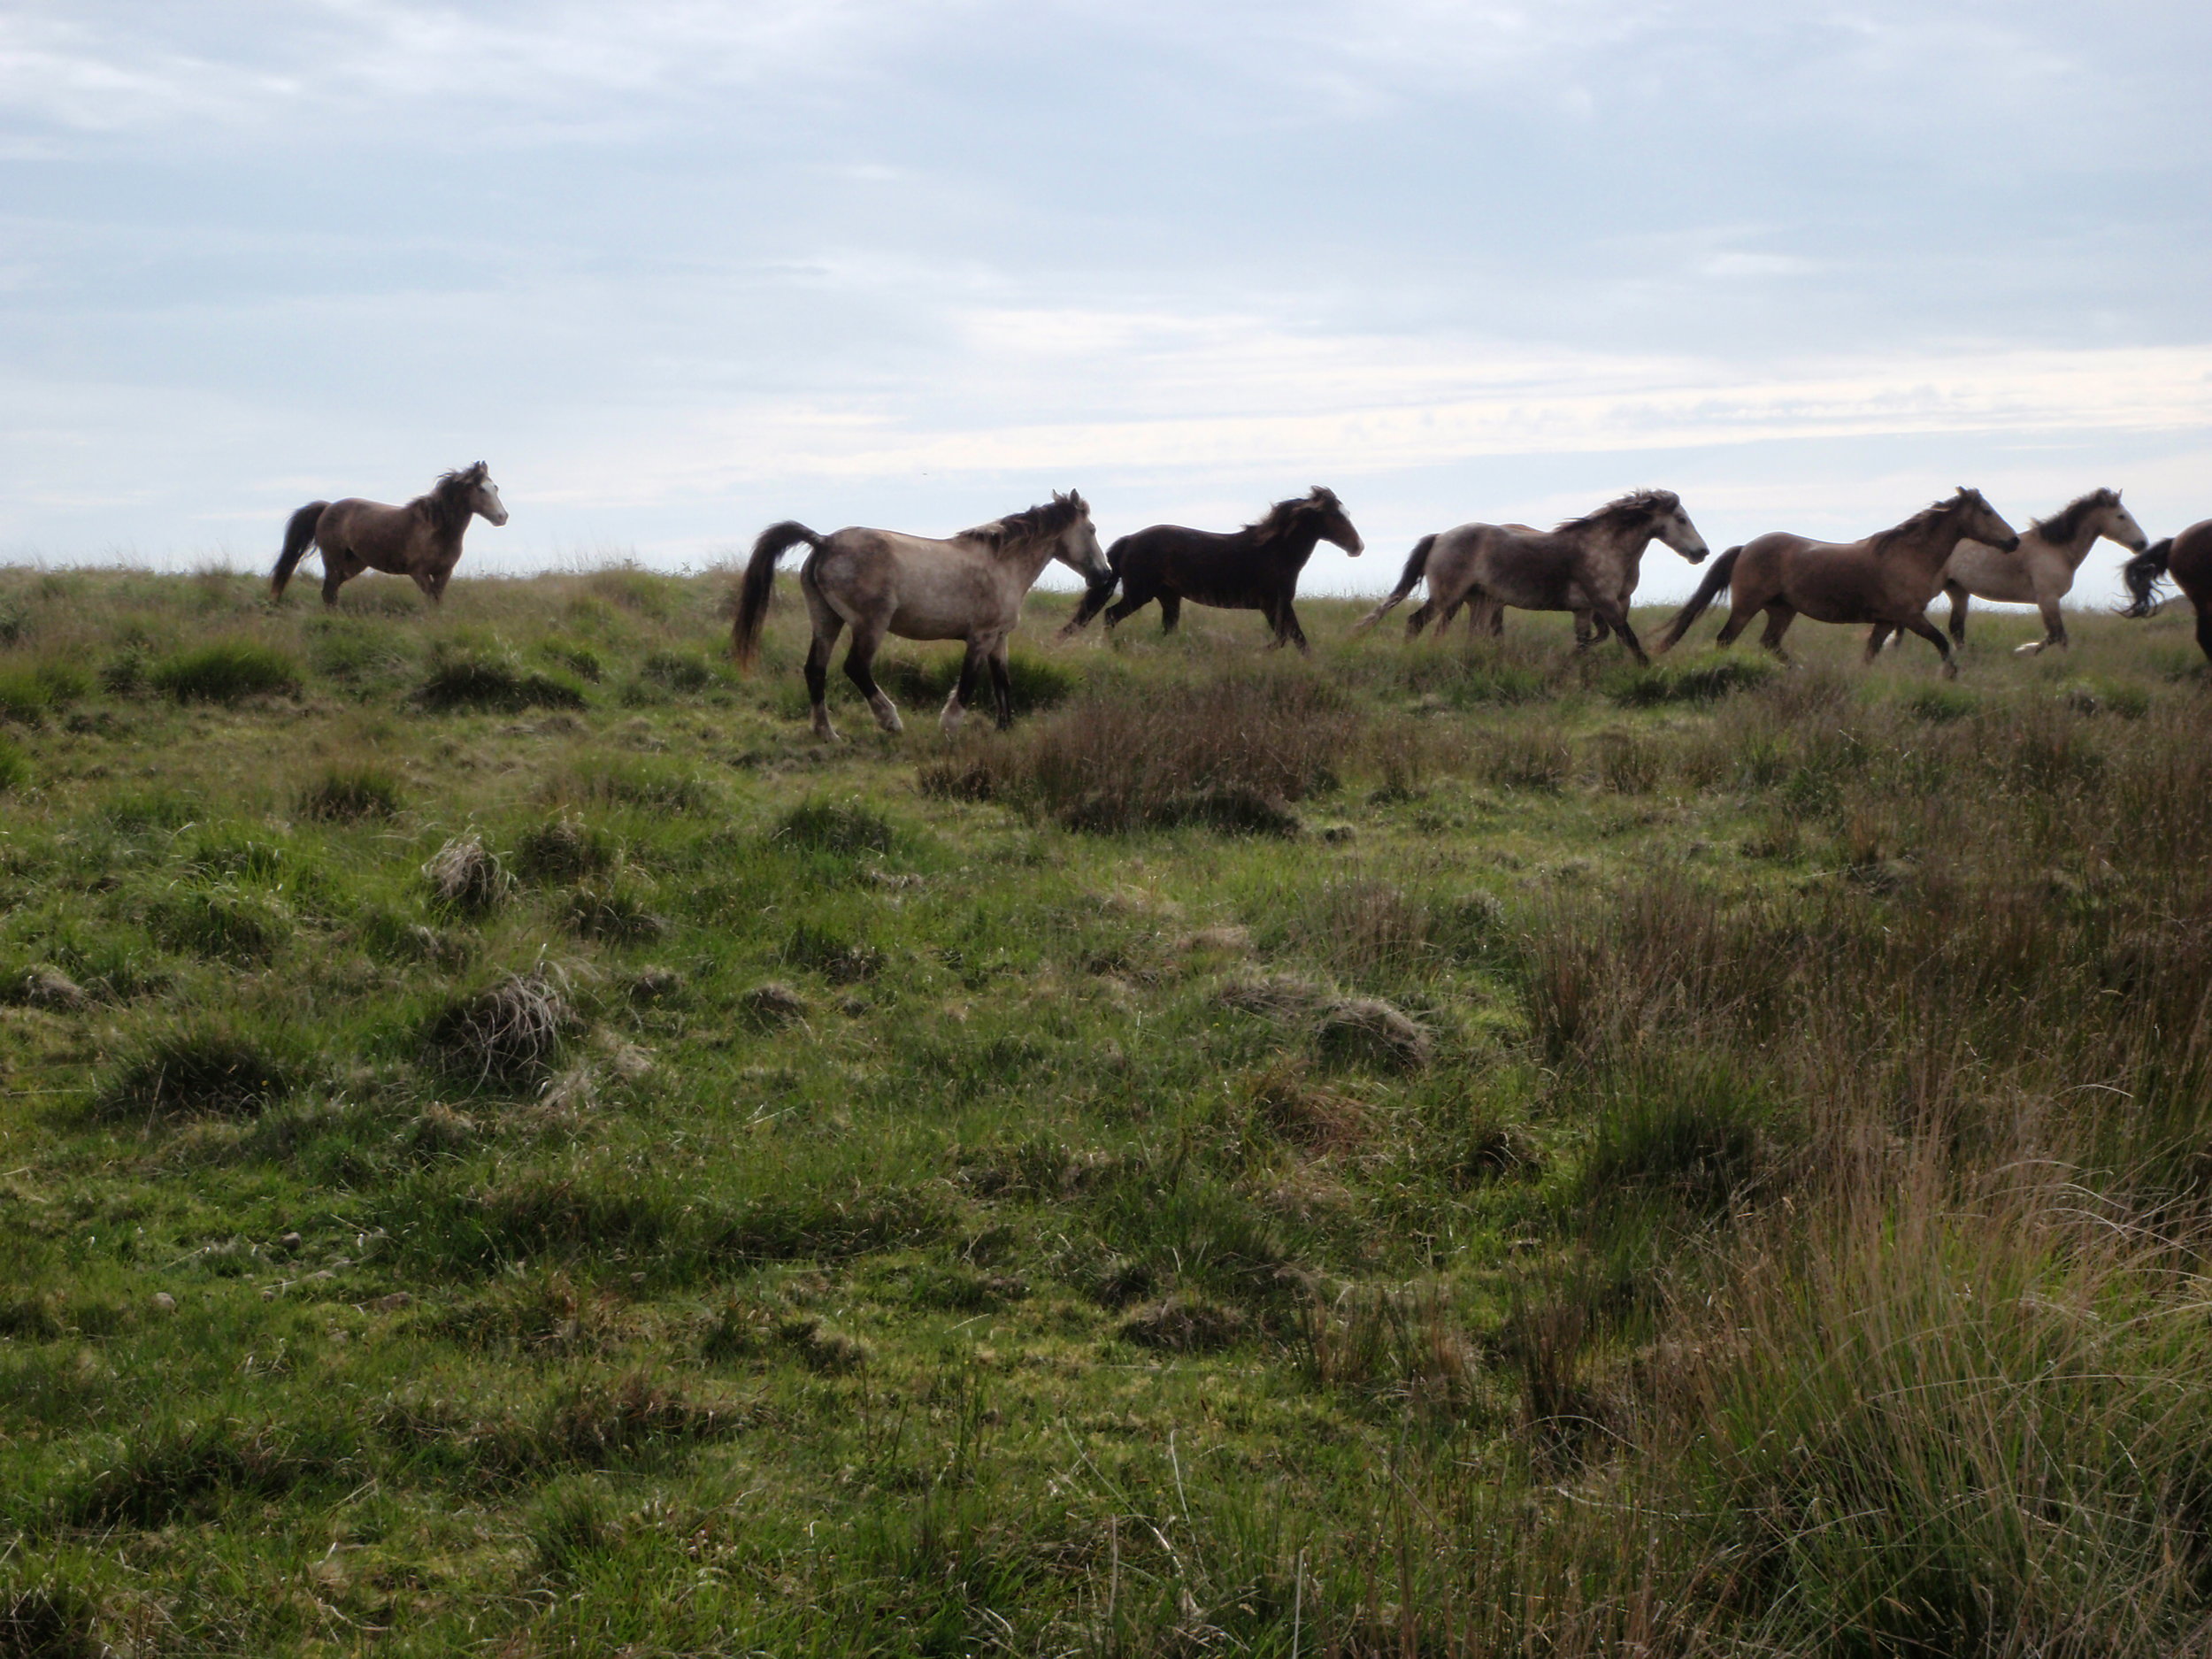 The wild ponies of Lundy